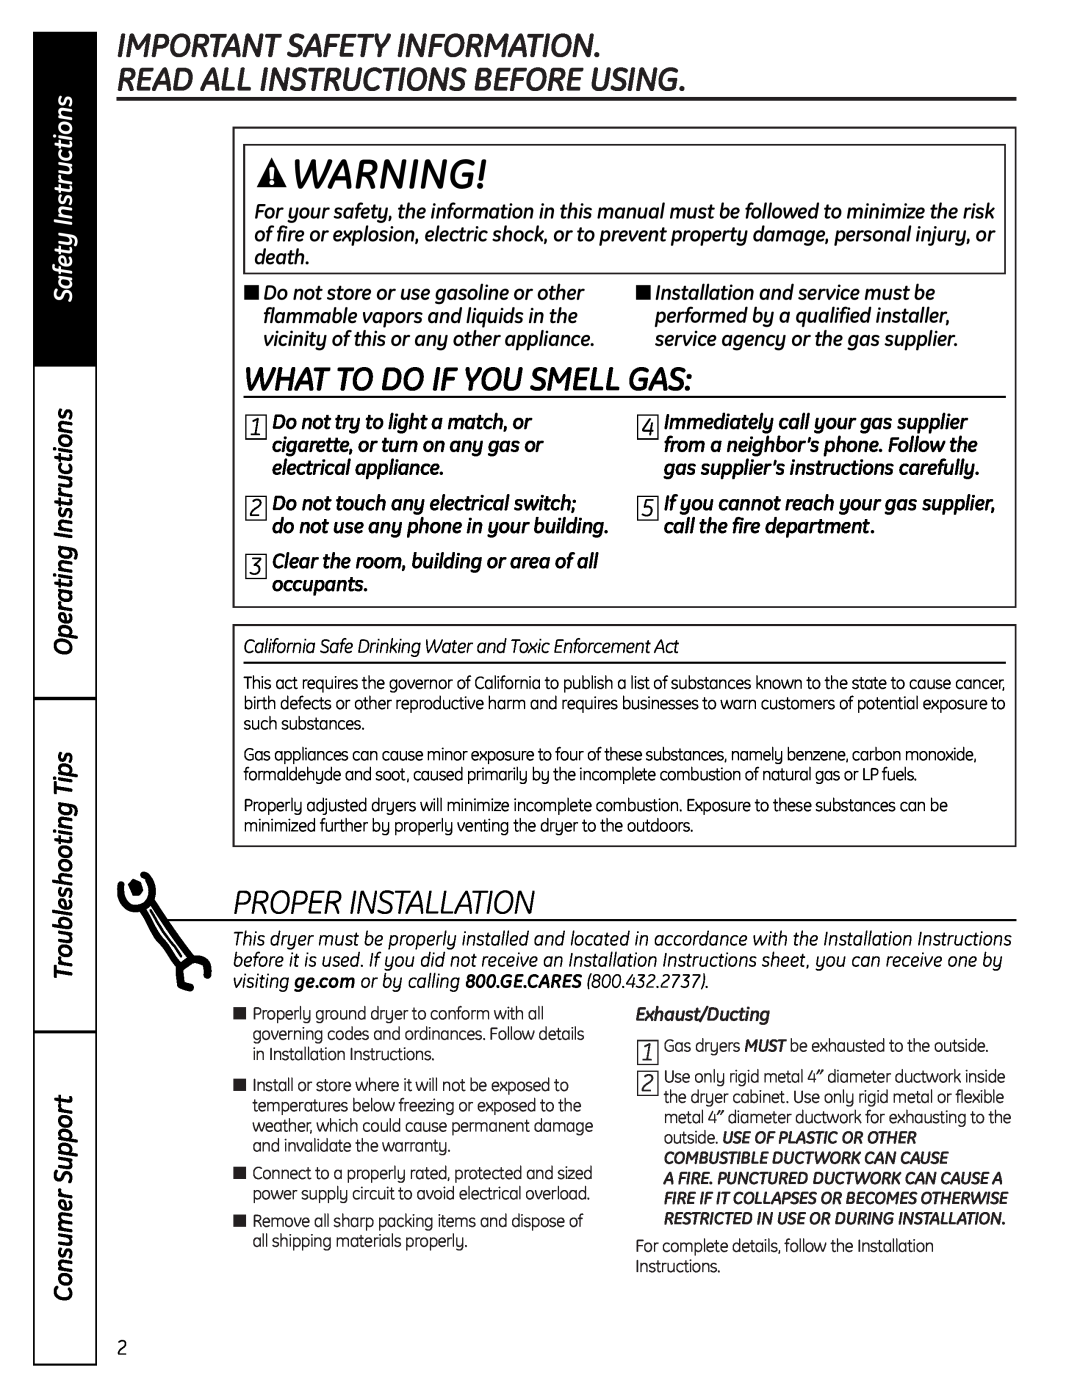 GE DWXR463 Important Safety Information Read All Instructions Before Using, What To Do If You Smell Gas, Consumer Support 